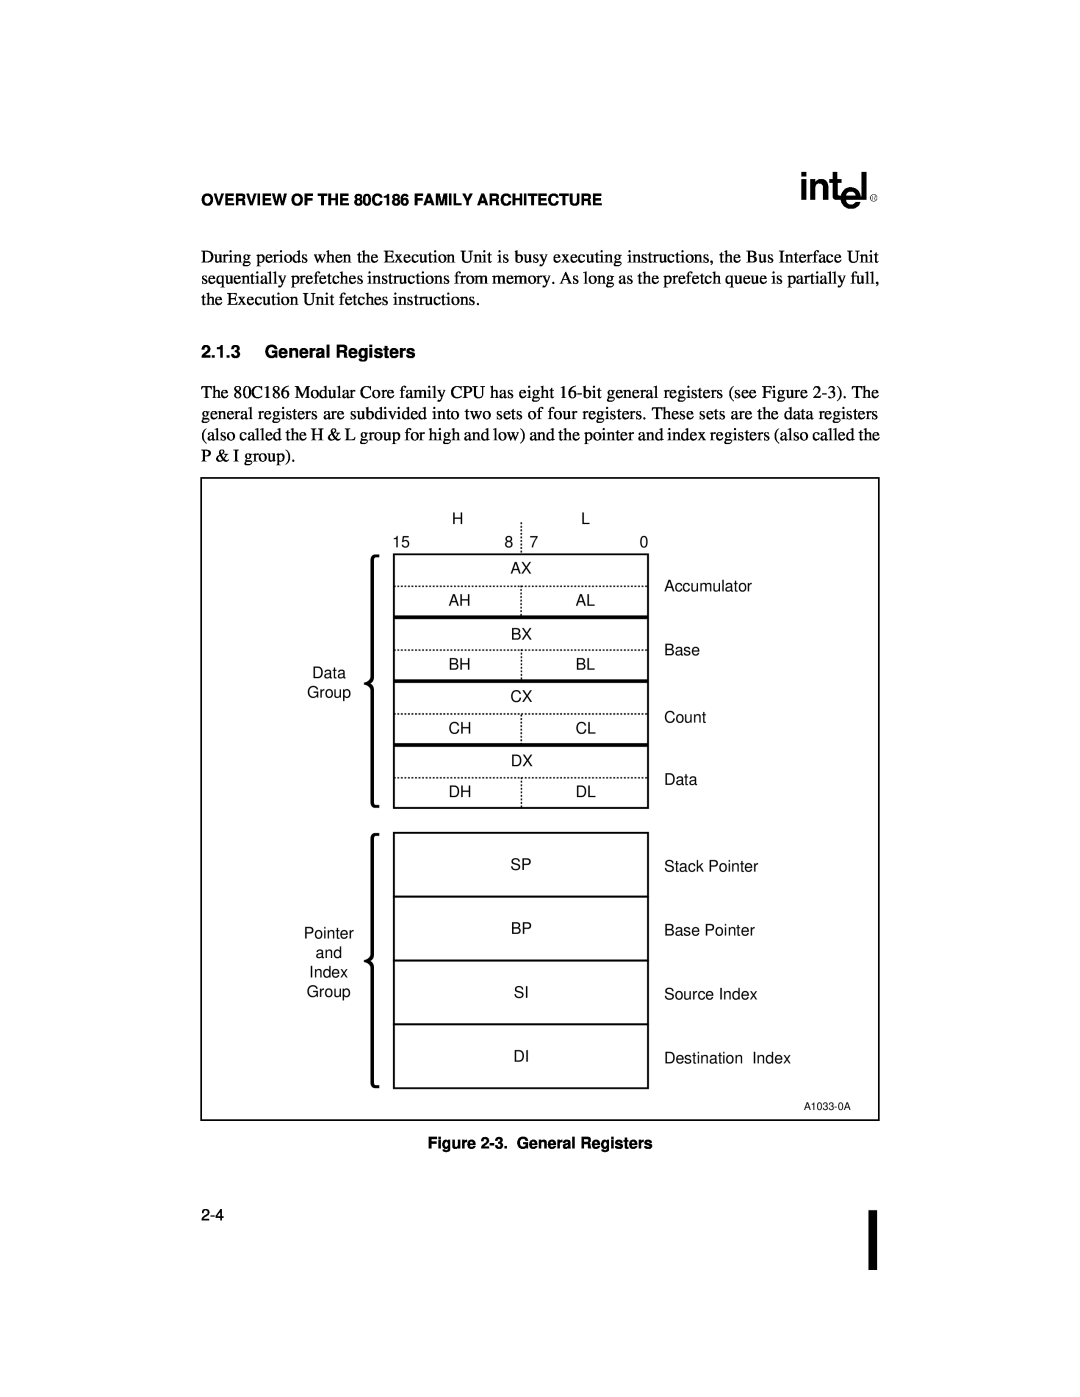 Intel 80C186XL, 80C188XL user manual 2.1.3General Registers, OVERVIEW OF THE 80C186 FAMILY ARCHITECTURE, 3.General Registers 